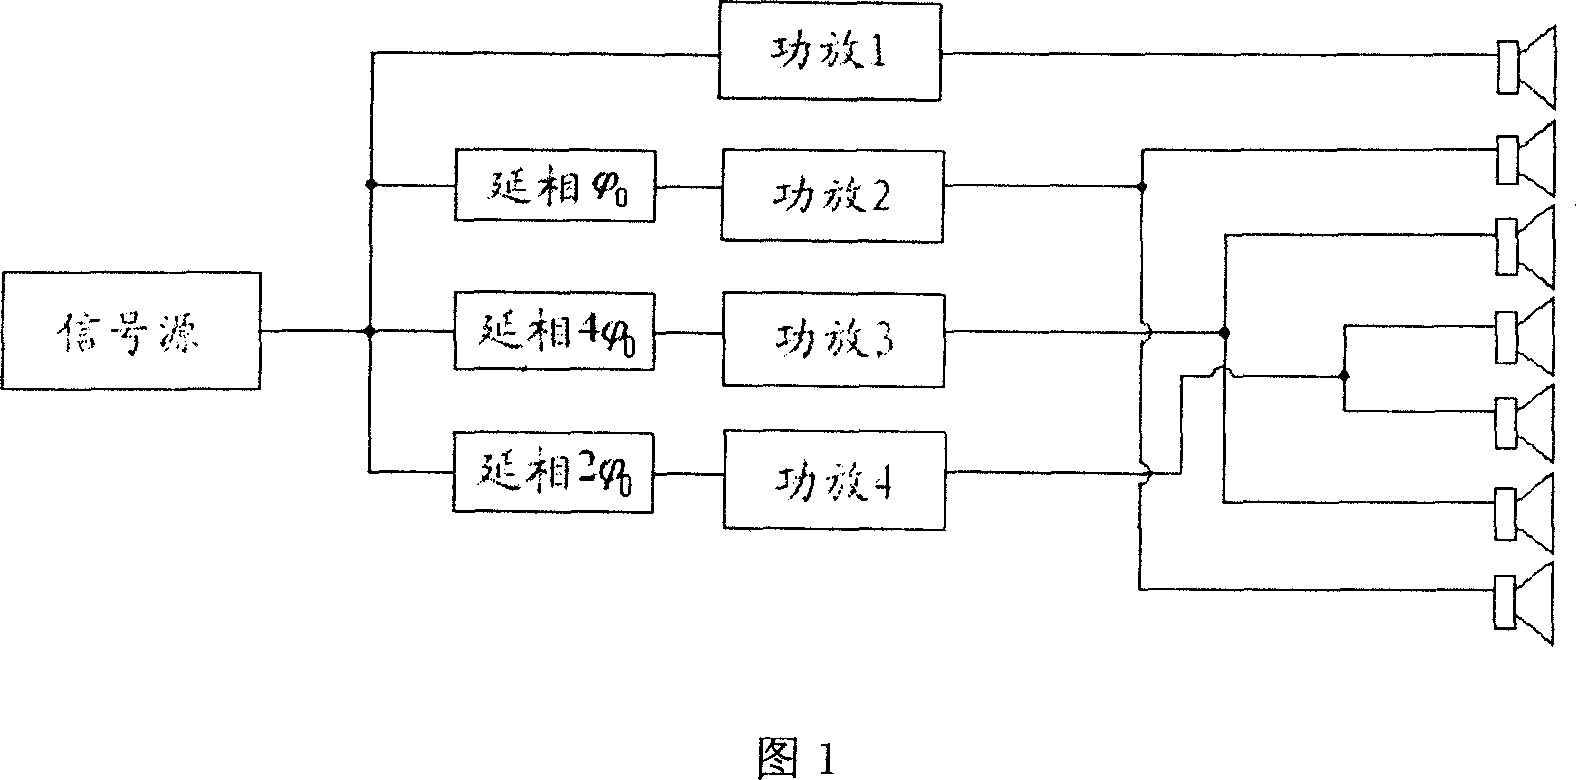 Method and device for loudspeaker array setting by using quadratic residue sequence phase delay